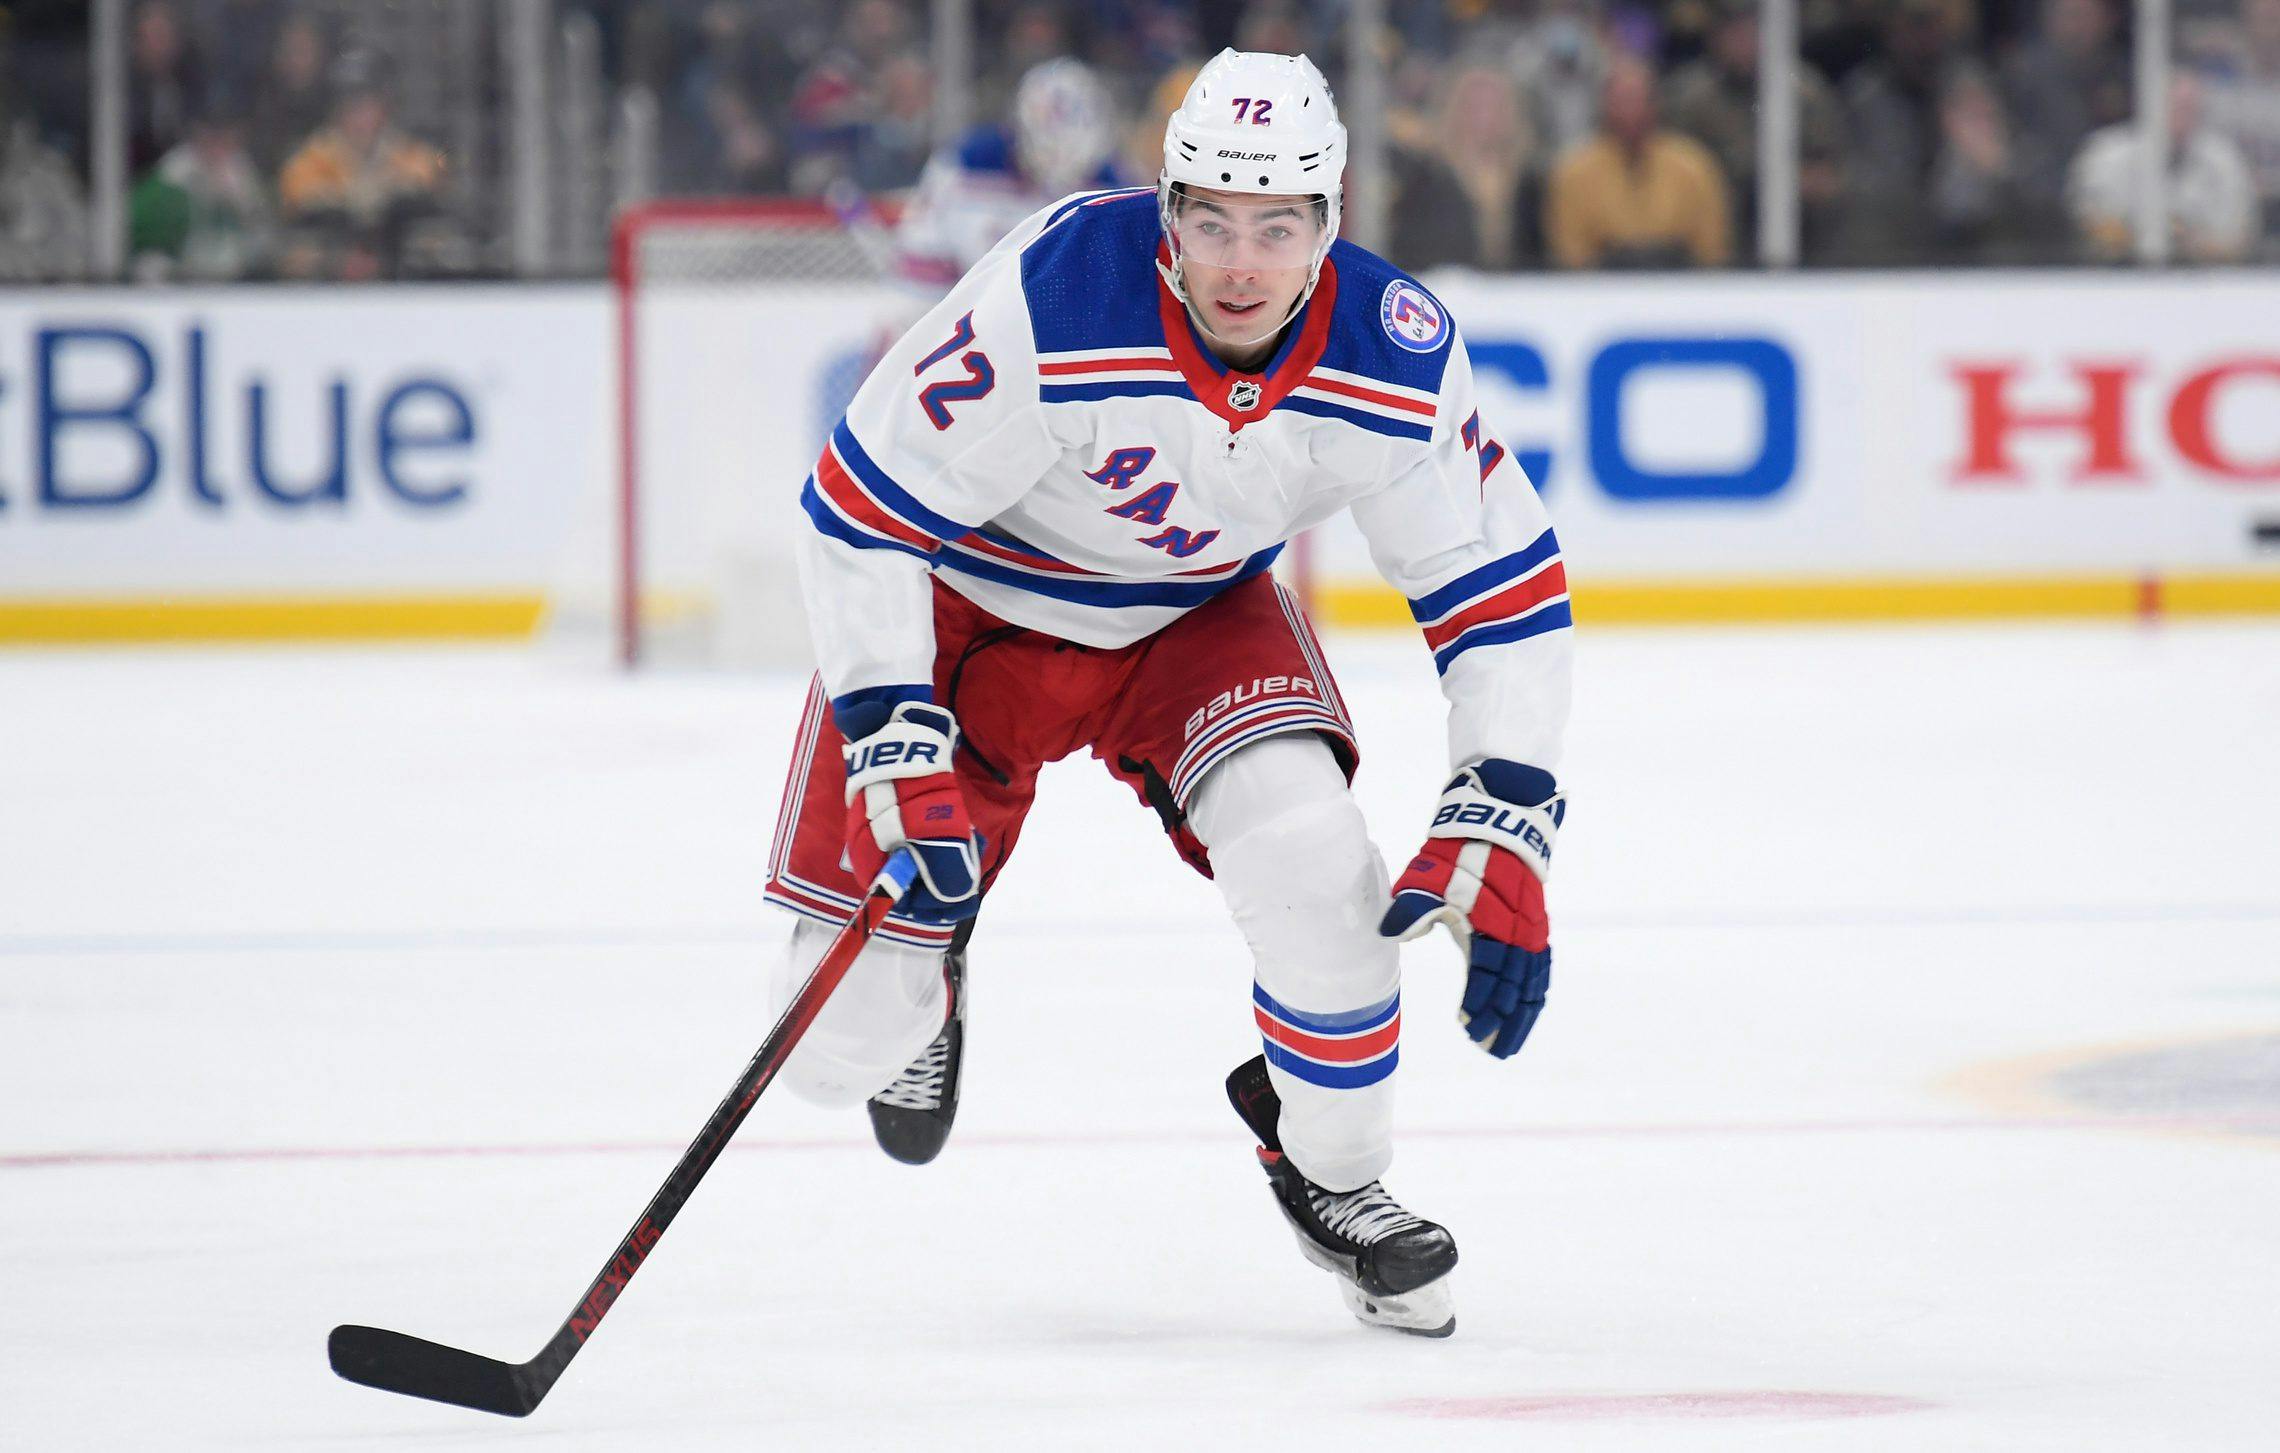 New York Rangers’ announce Filip Chytil will be out for the rest of the season